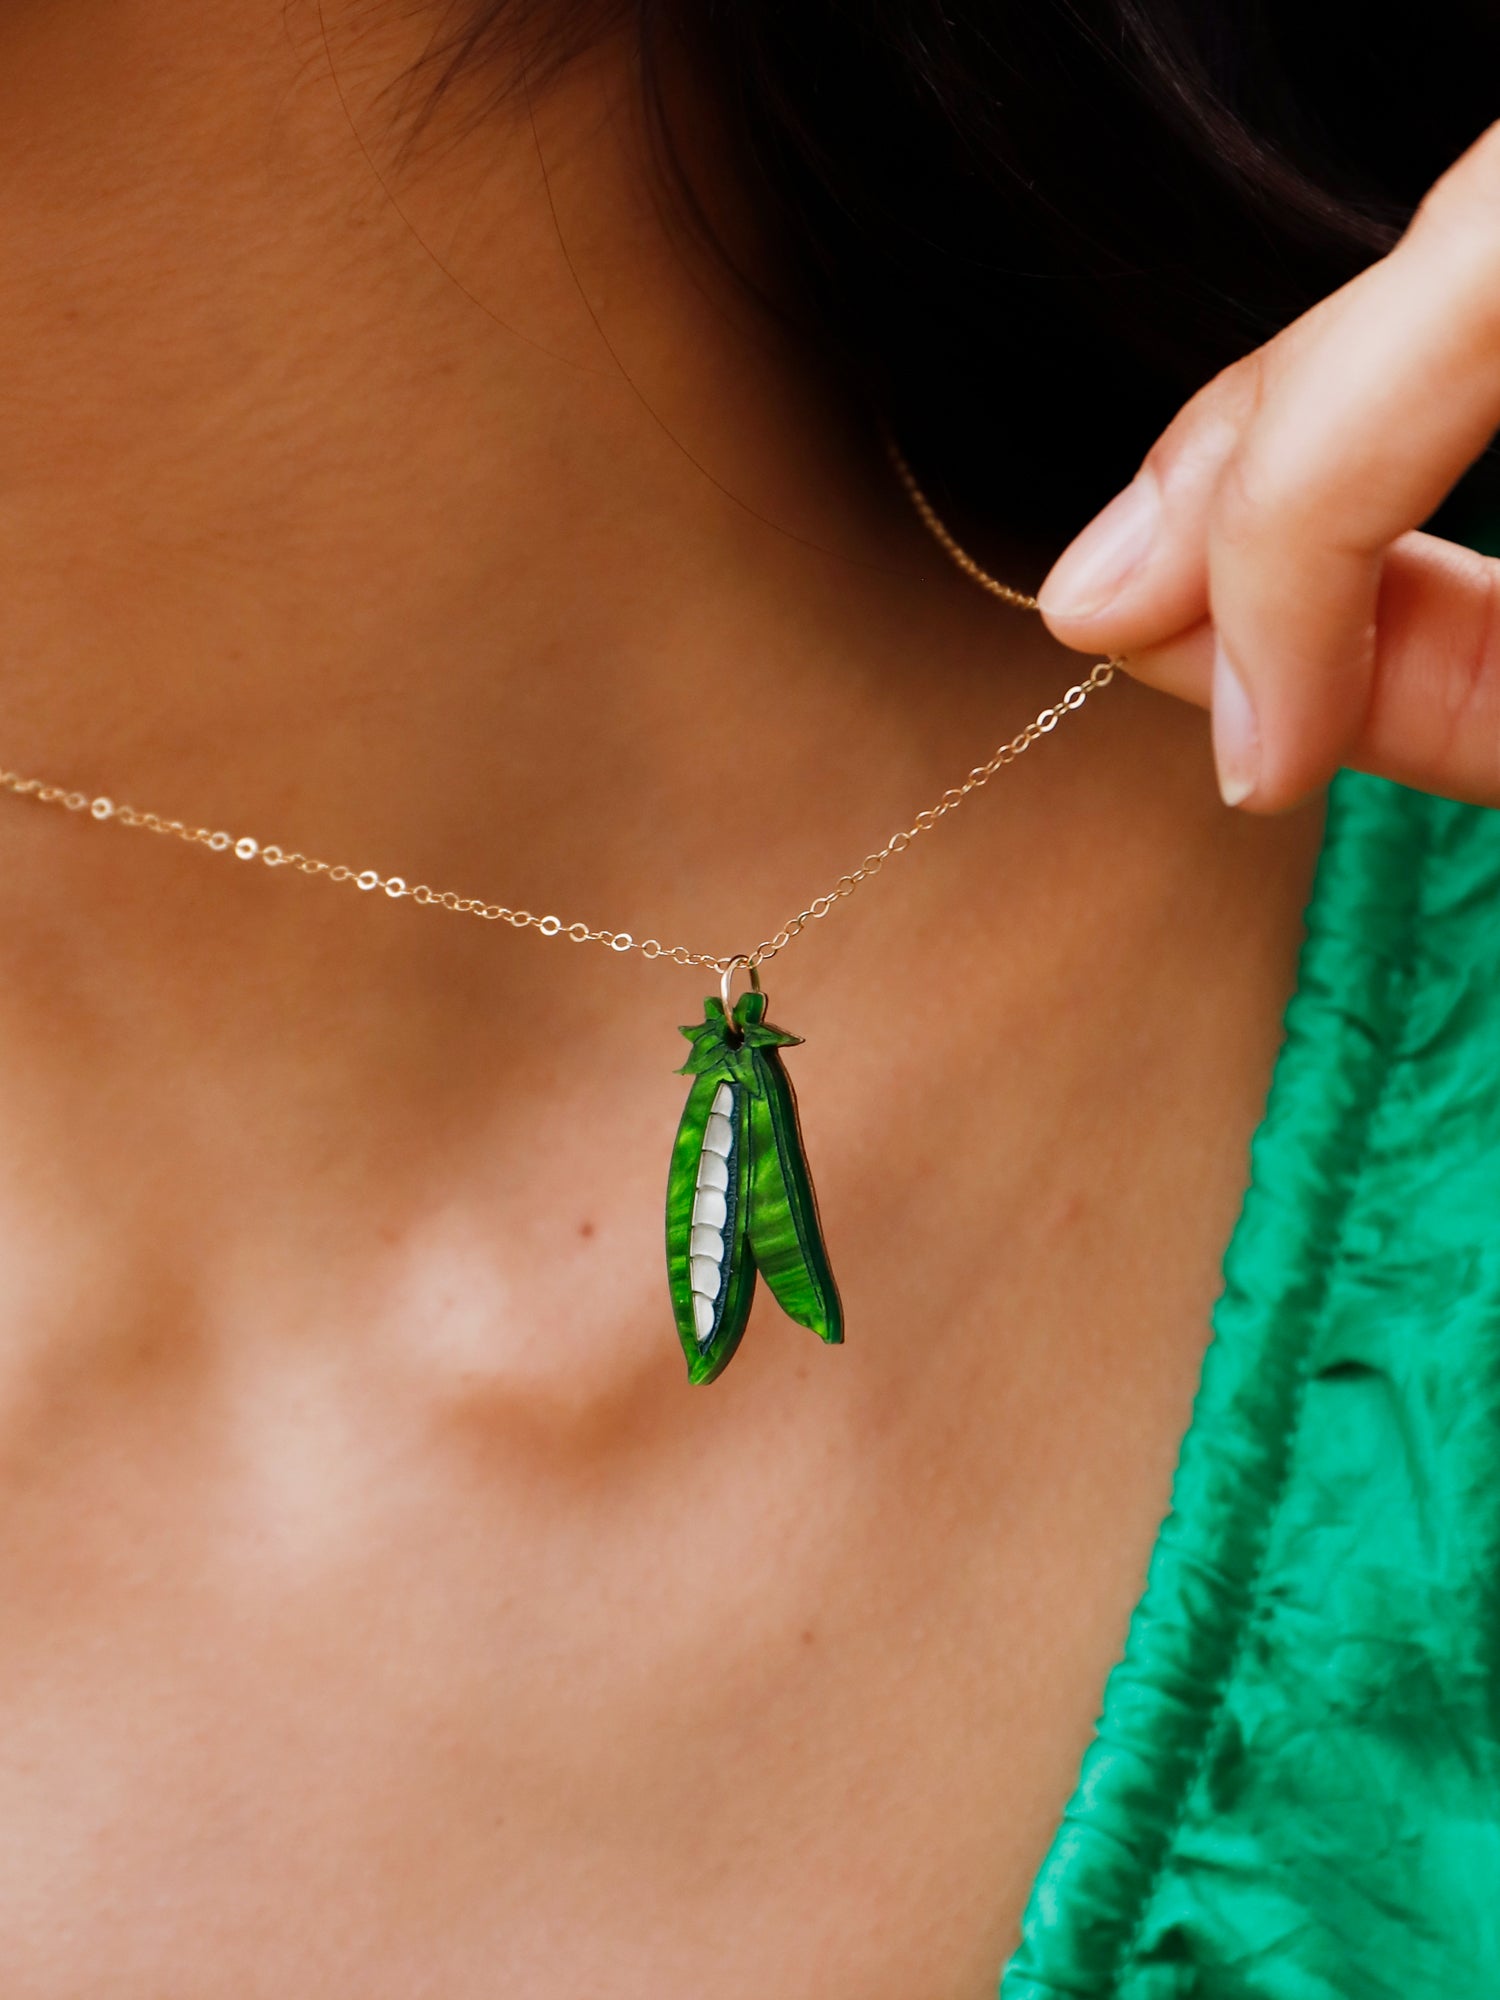 A playful peas in a pod pendant made from marbled acrylic and wood with an optional 14k gold-filled chain. Handmade in London by Wolf & Moon.